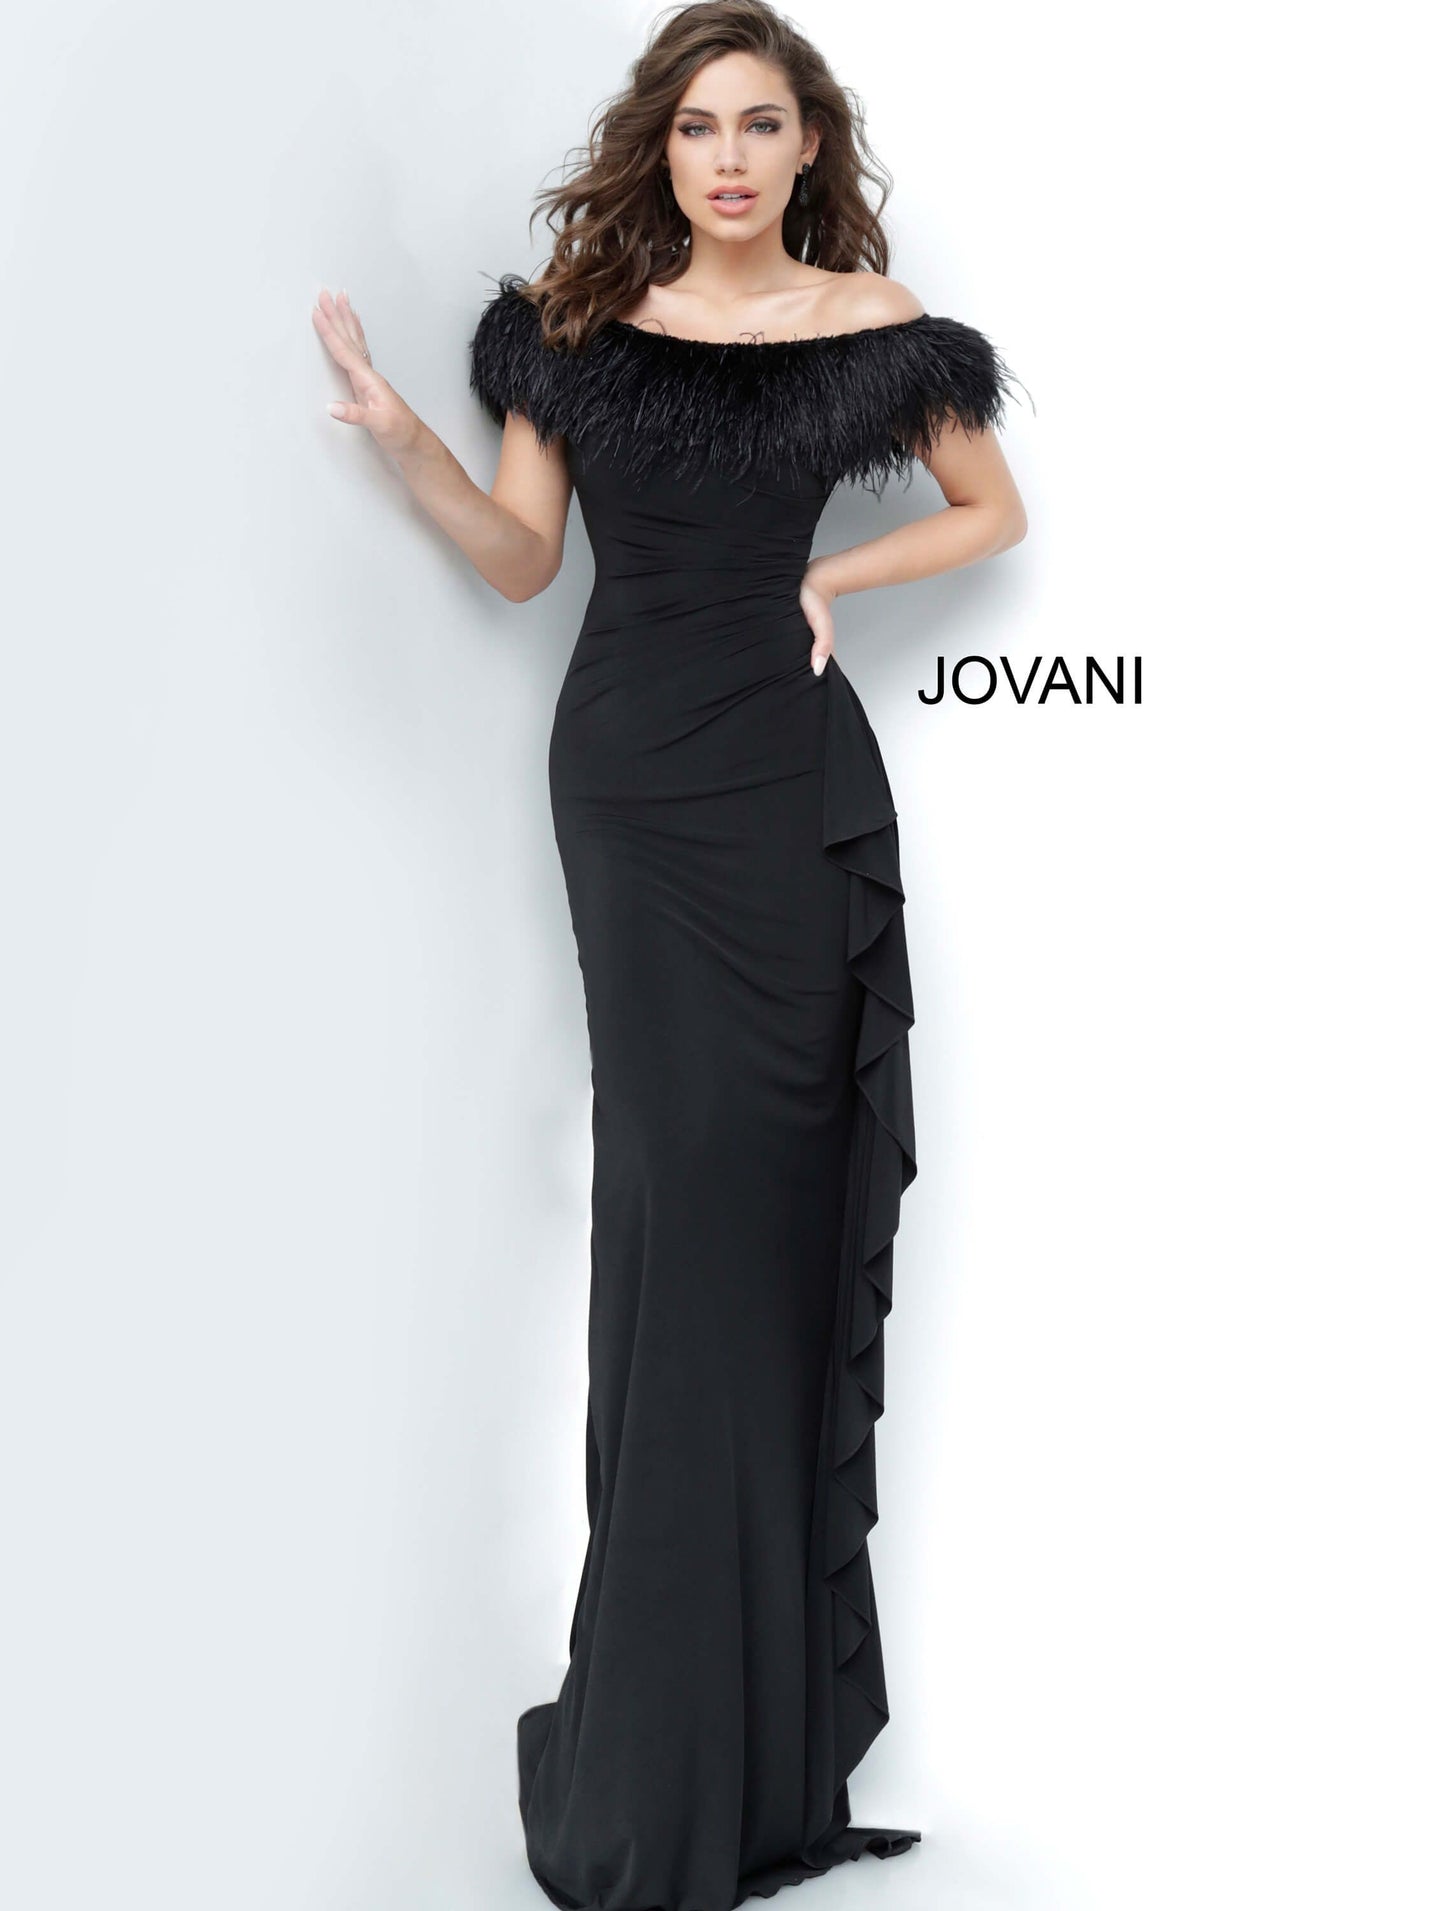 Jovani 1147 off the shoulder feather trim fitted evening gown with ruffle trim   Available colors:  Black  Available sizes:  00-24 